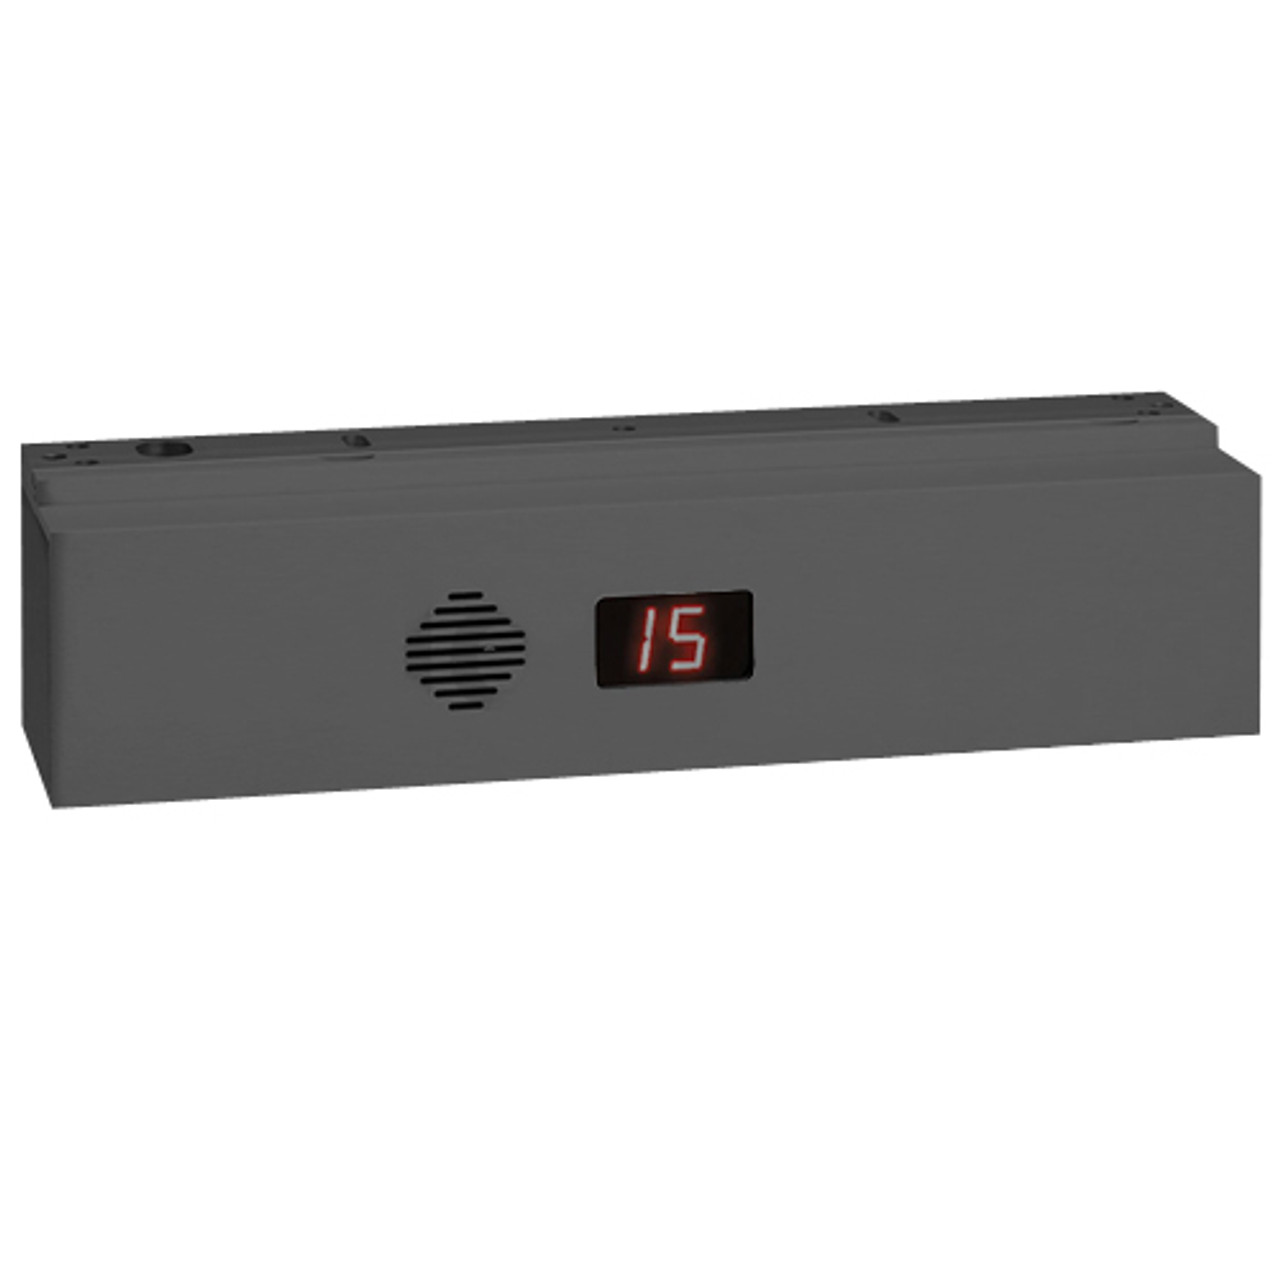 1511S-ND-L-Y-DBA SDC 1511S Series Single Integrated Delayed Egress Locks with Door Position Status and Magnetic Bond Sensor in Black Anodized